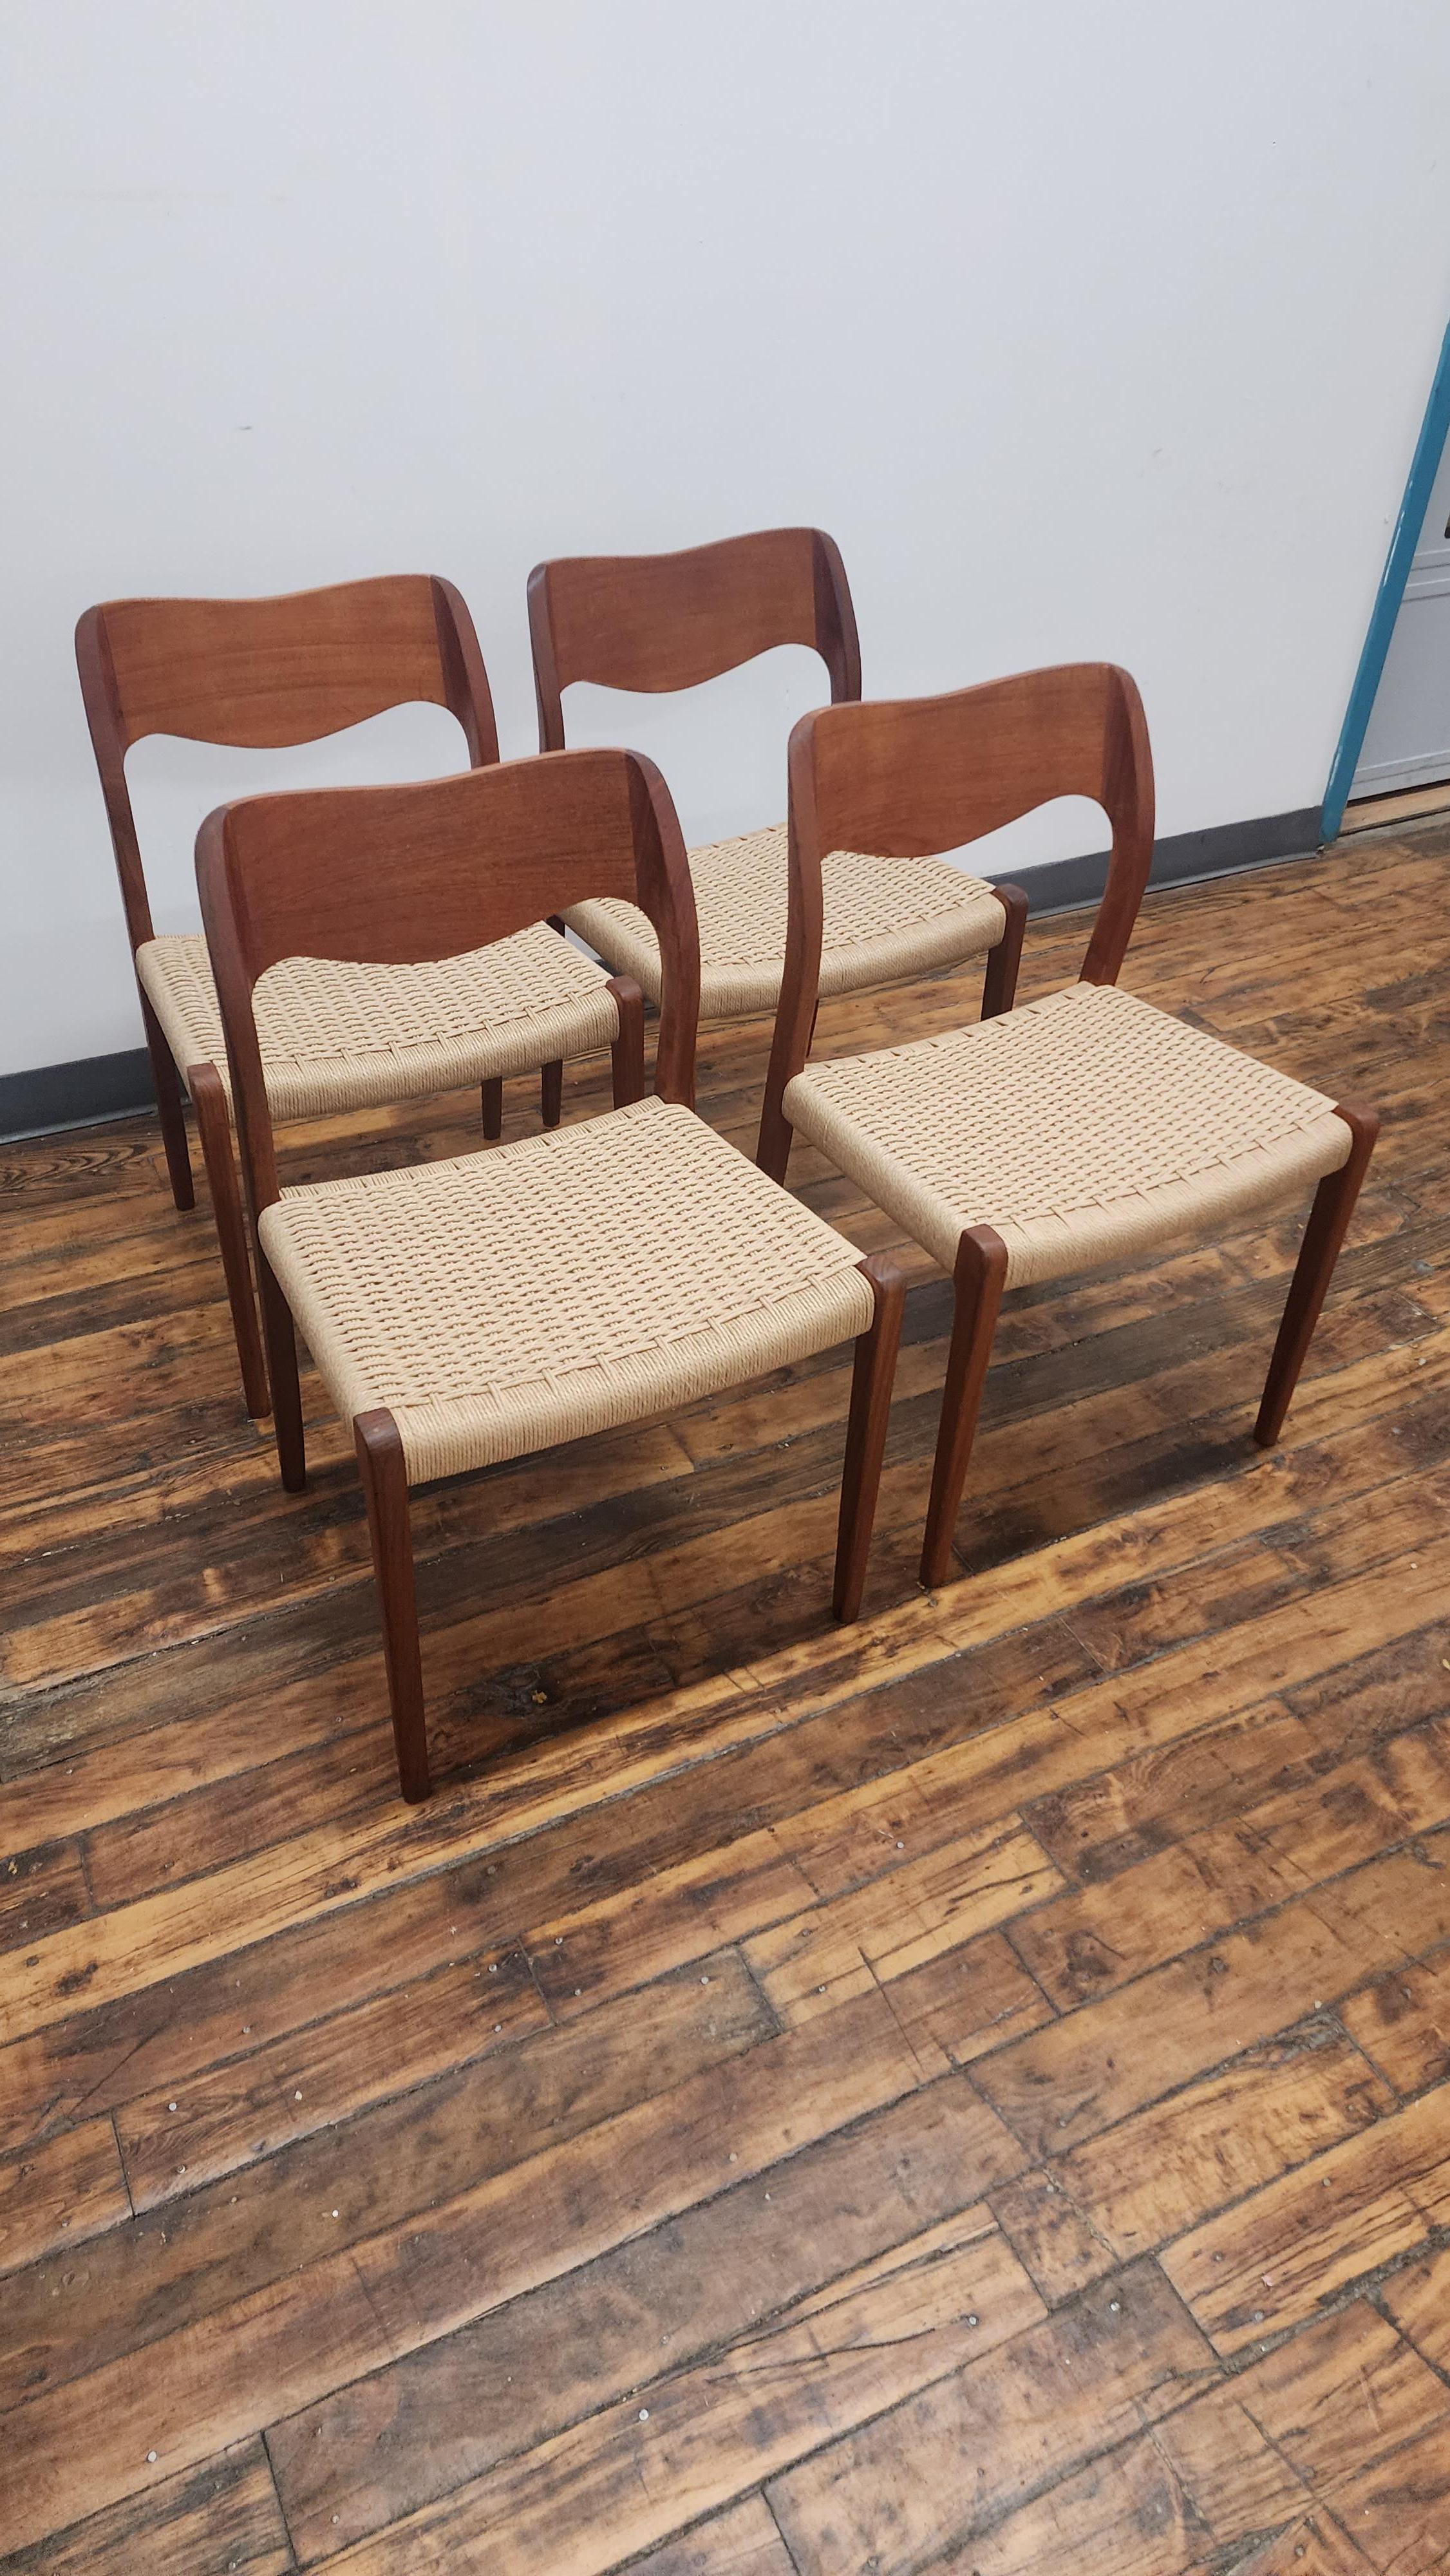 Beautiful refinished set of 4 teak side chair by Niels Moller for J.L. Moller mobelfabrik. teak has been stripped and re-oiled. they have new danish cord.